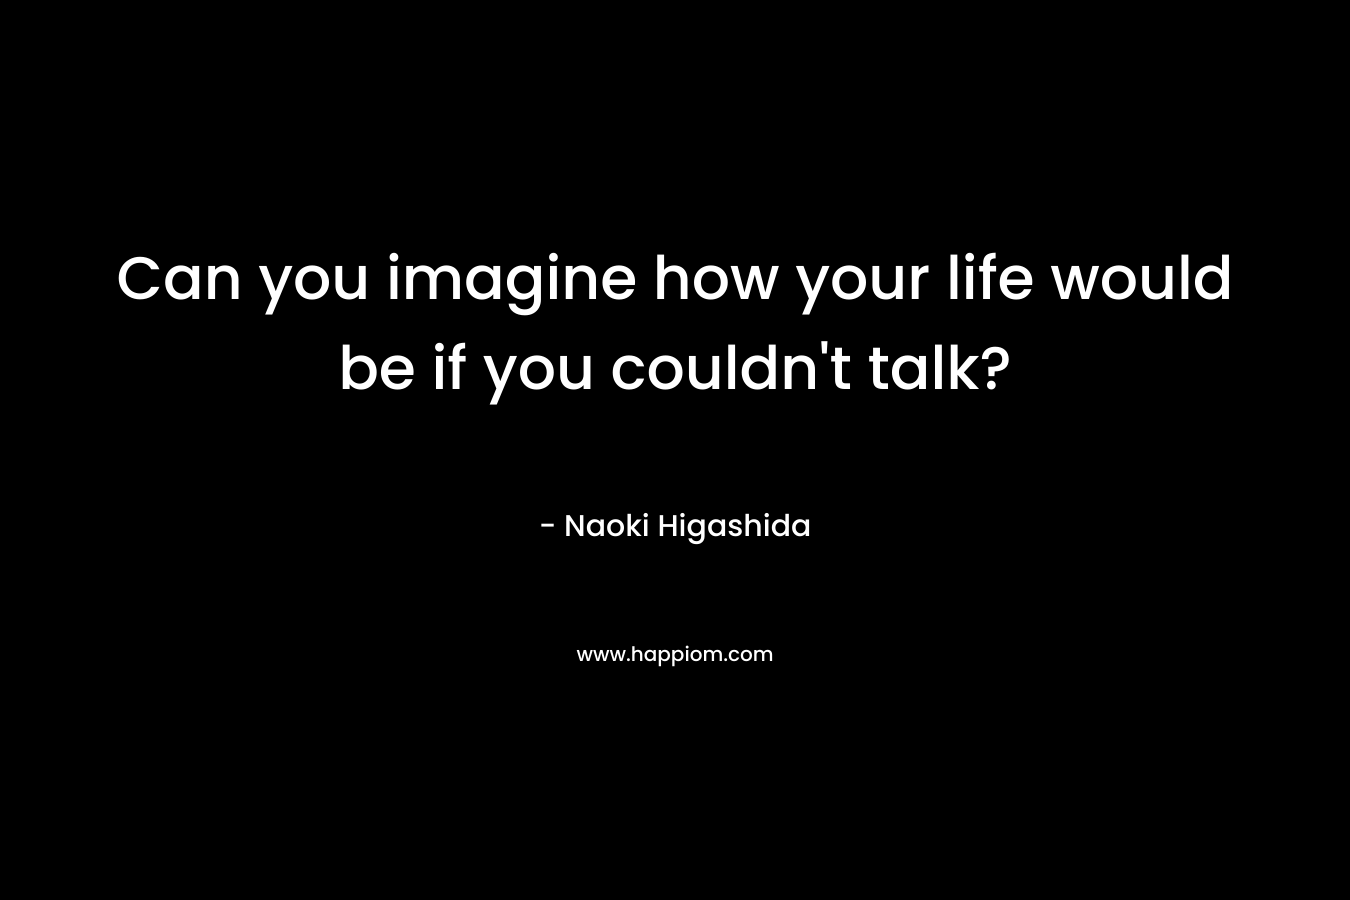 Can you imagine how your life would be if you couldn’t talk? – Naoki Higashida